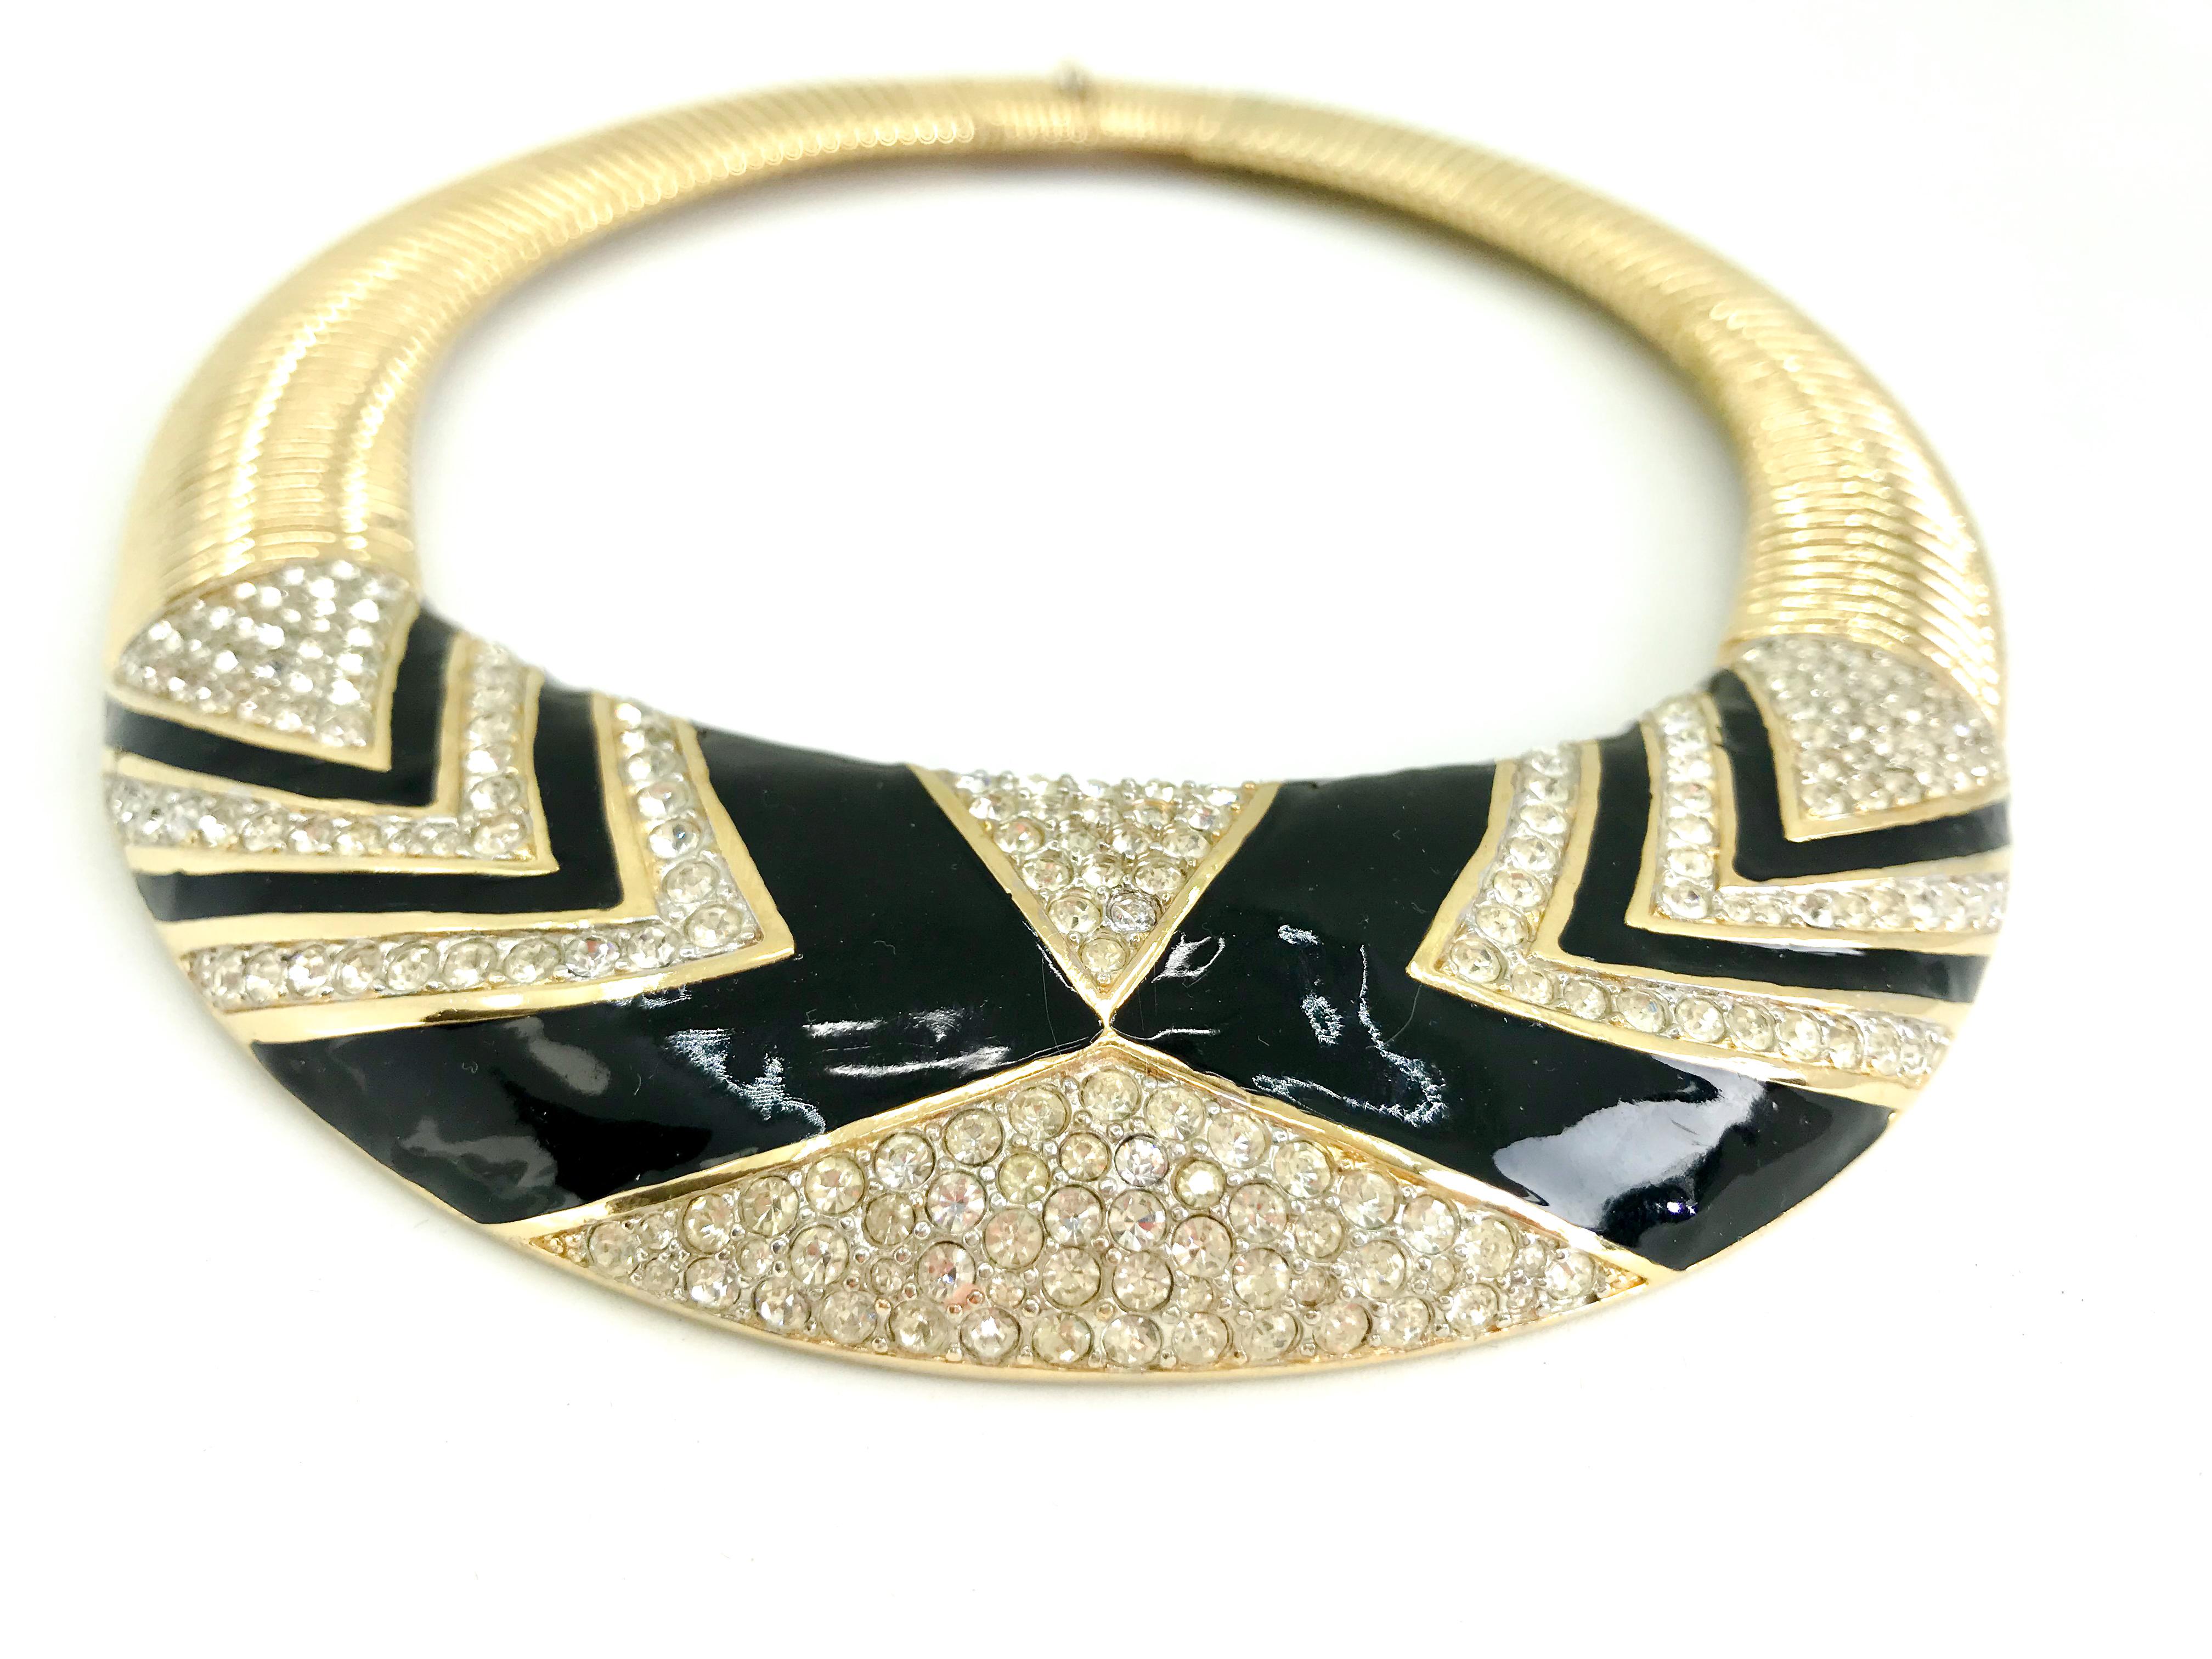 Stunning Nina Ricci 1980s vintage bib necklace.  Sure to transform any outfit.  Signed Nina Ricci on the reverse.  A really well made quality piece.  Comes with the original box.

Dimensions
Length - approx 19 inches
Bib - 1.5 inch high x 5 inches